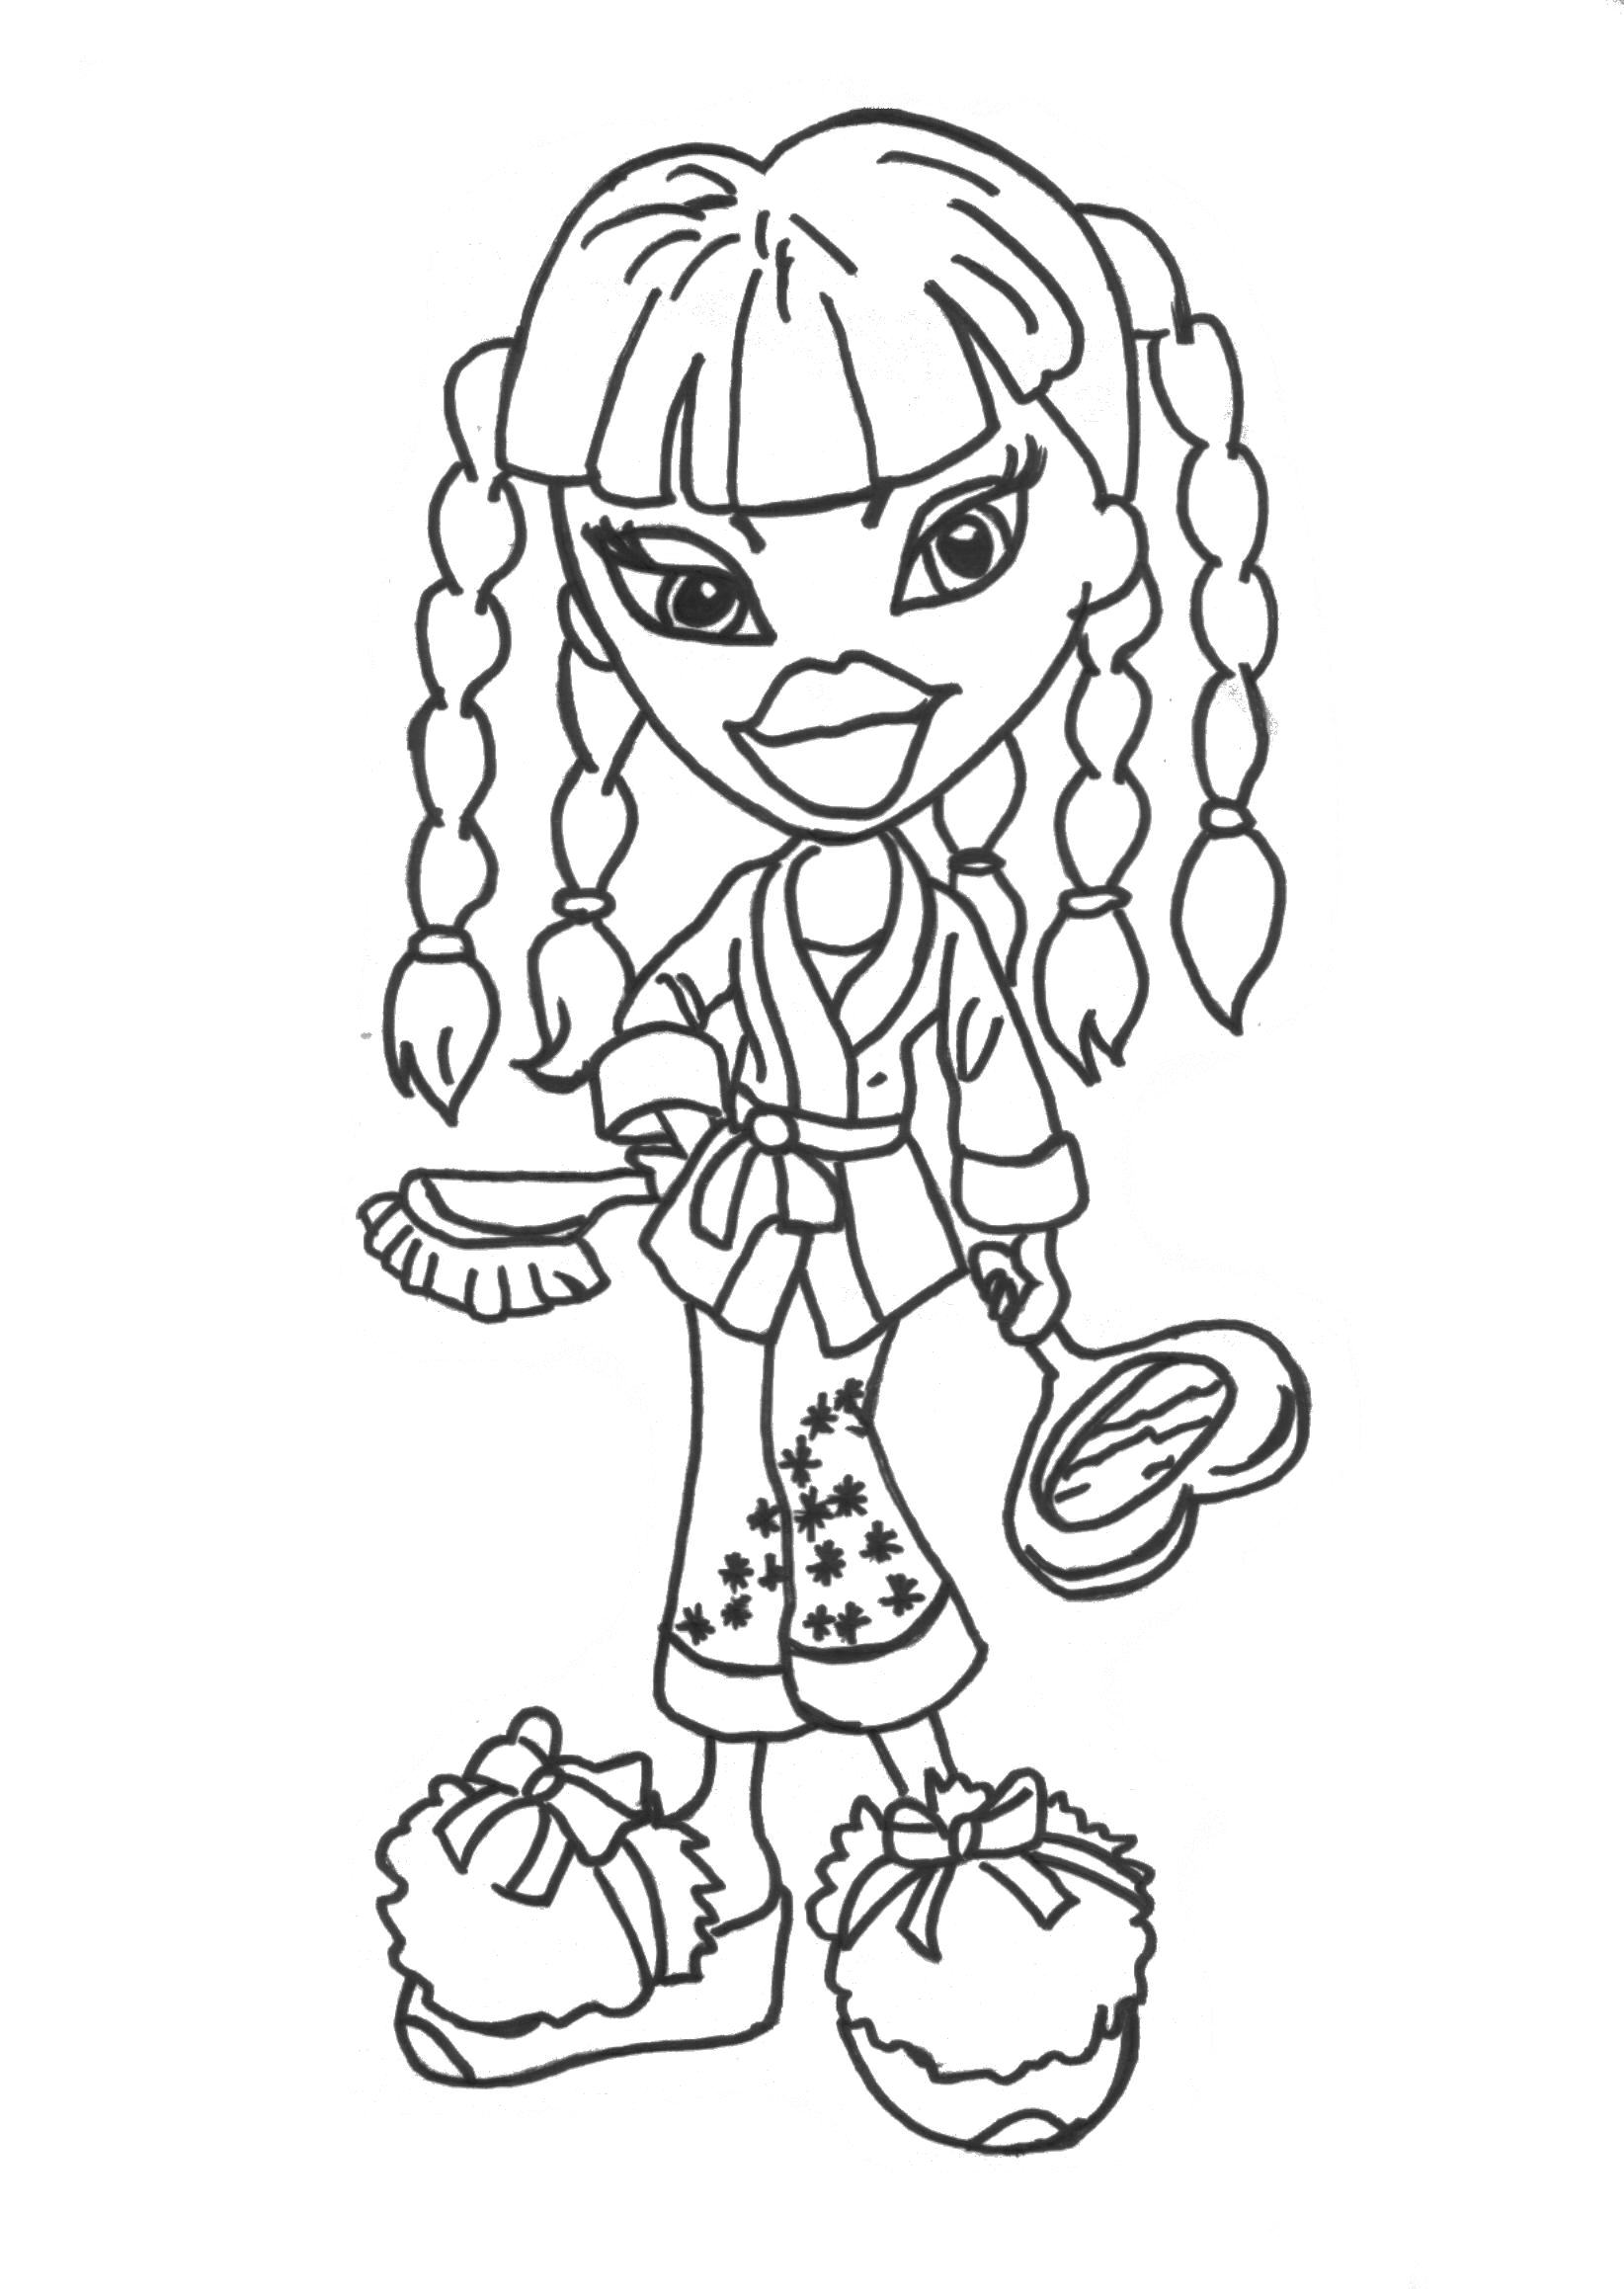 Bratz Coloring Pages That Are Printable - Tradebit